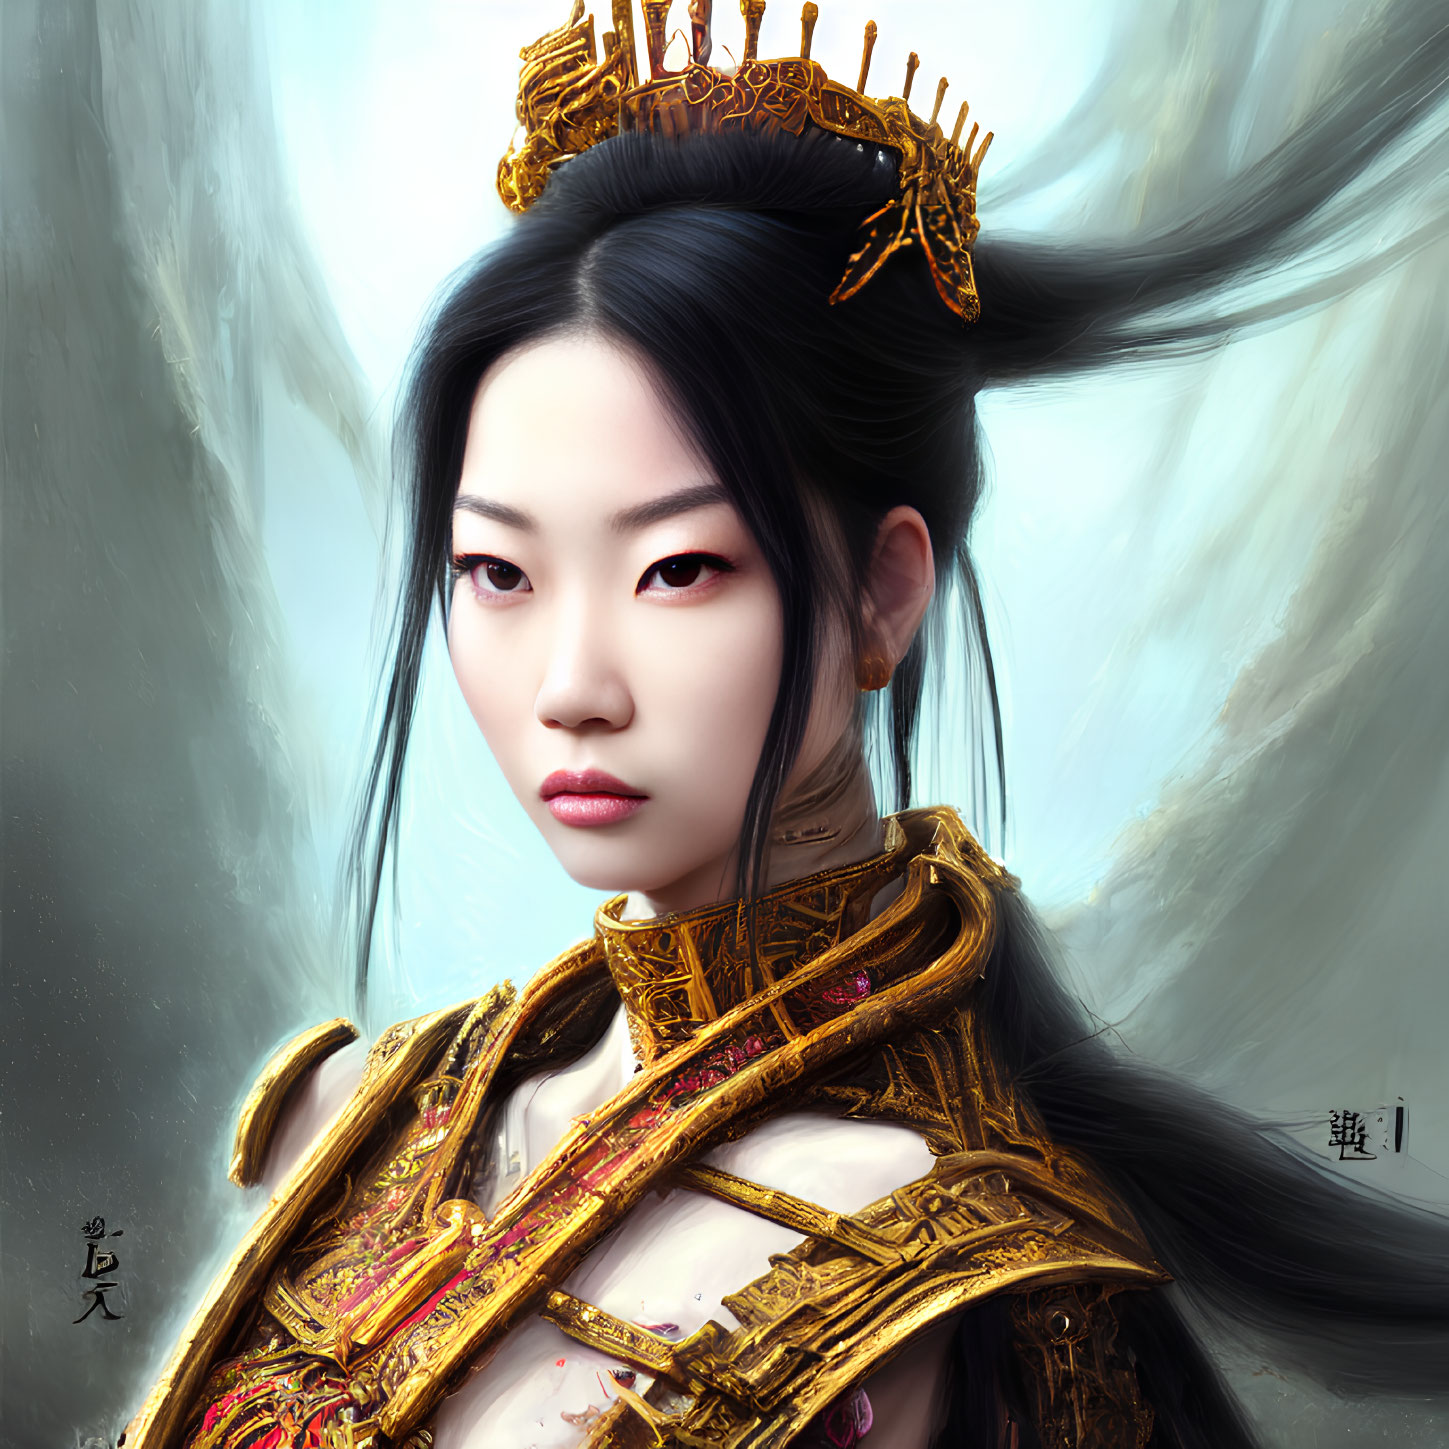 Regal Woman in Golden Crown and Armor with Flowing Black Hair